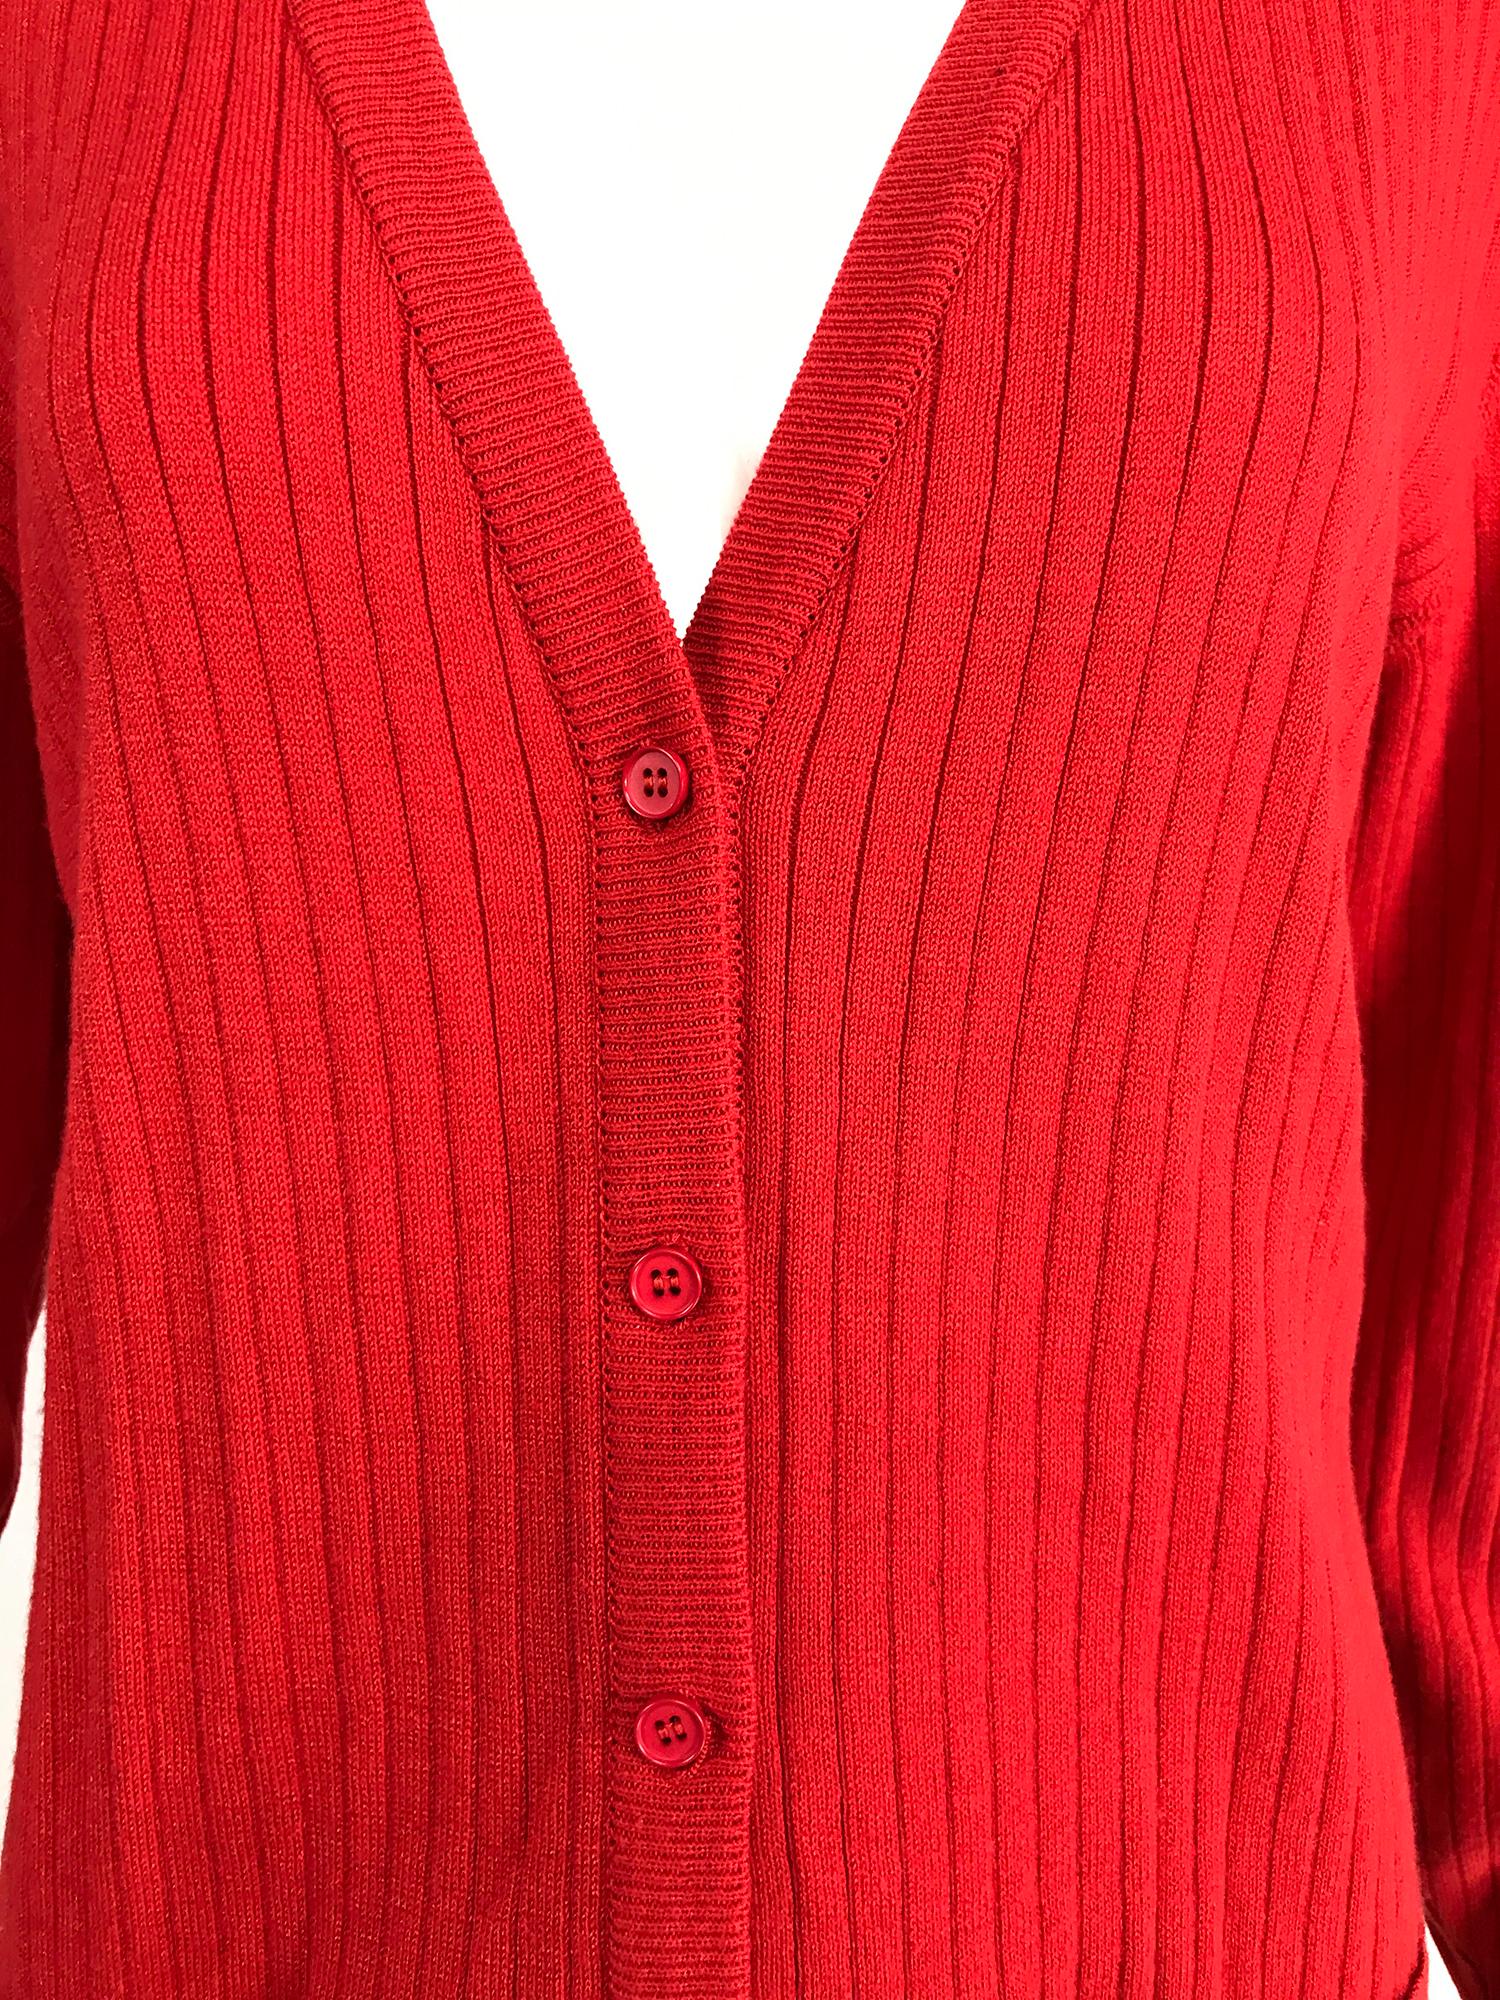 Courreges red V neck ribbed cardigan sweater 1980s. Long sleeve sweater with narrow ribs, hip front pockets, closes at the front with 6 red buttons. Fits like a size small-medium. 
In excellent wearable condition.  All our clothing is dry cleaned